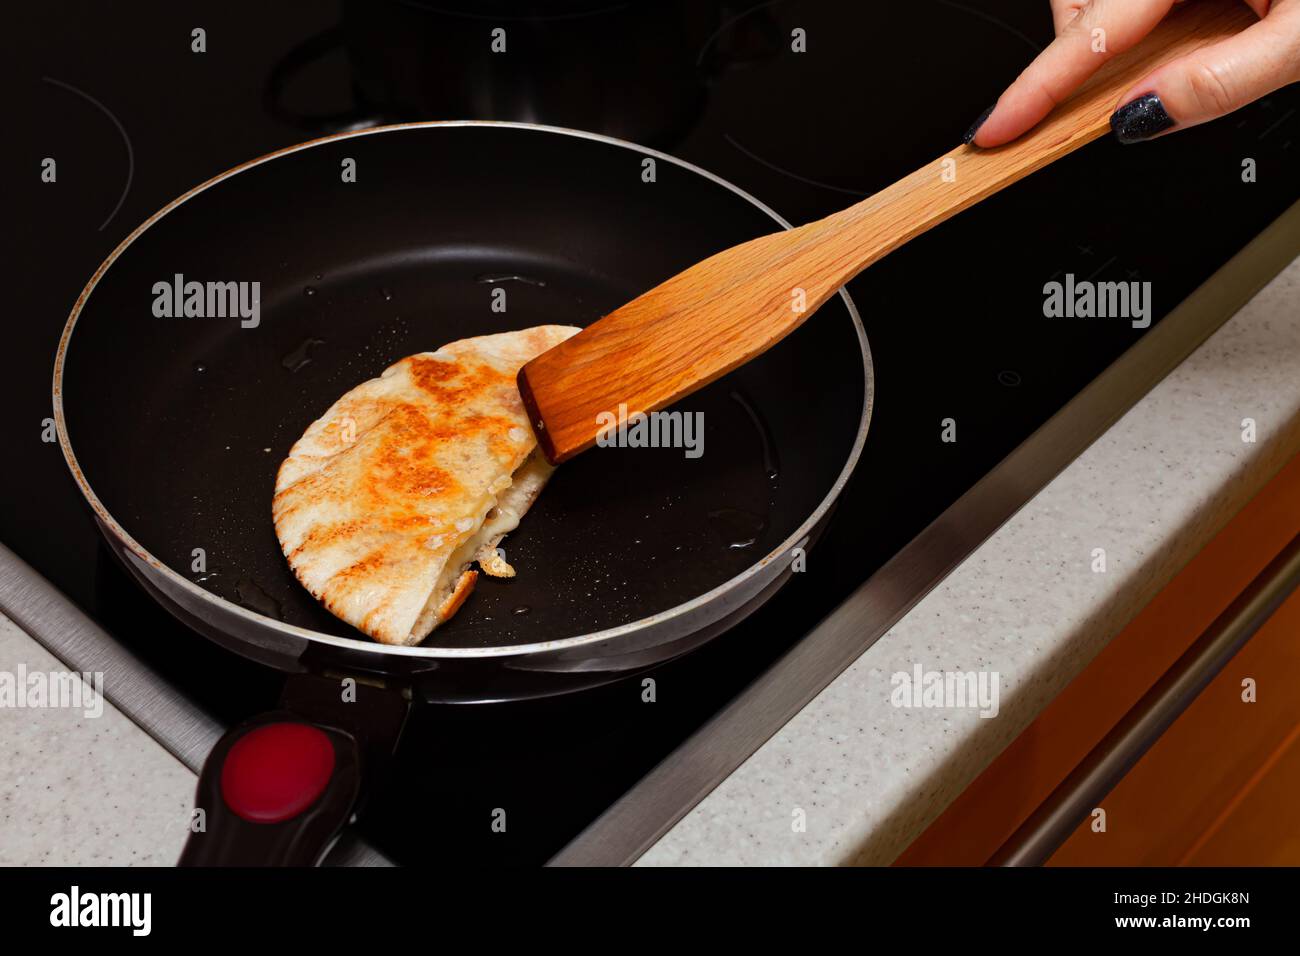 a woman's hand with a spatula turns a cake in a frying pan Stock Photo